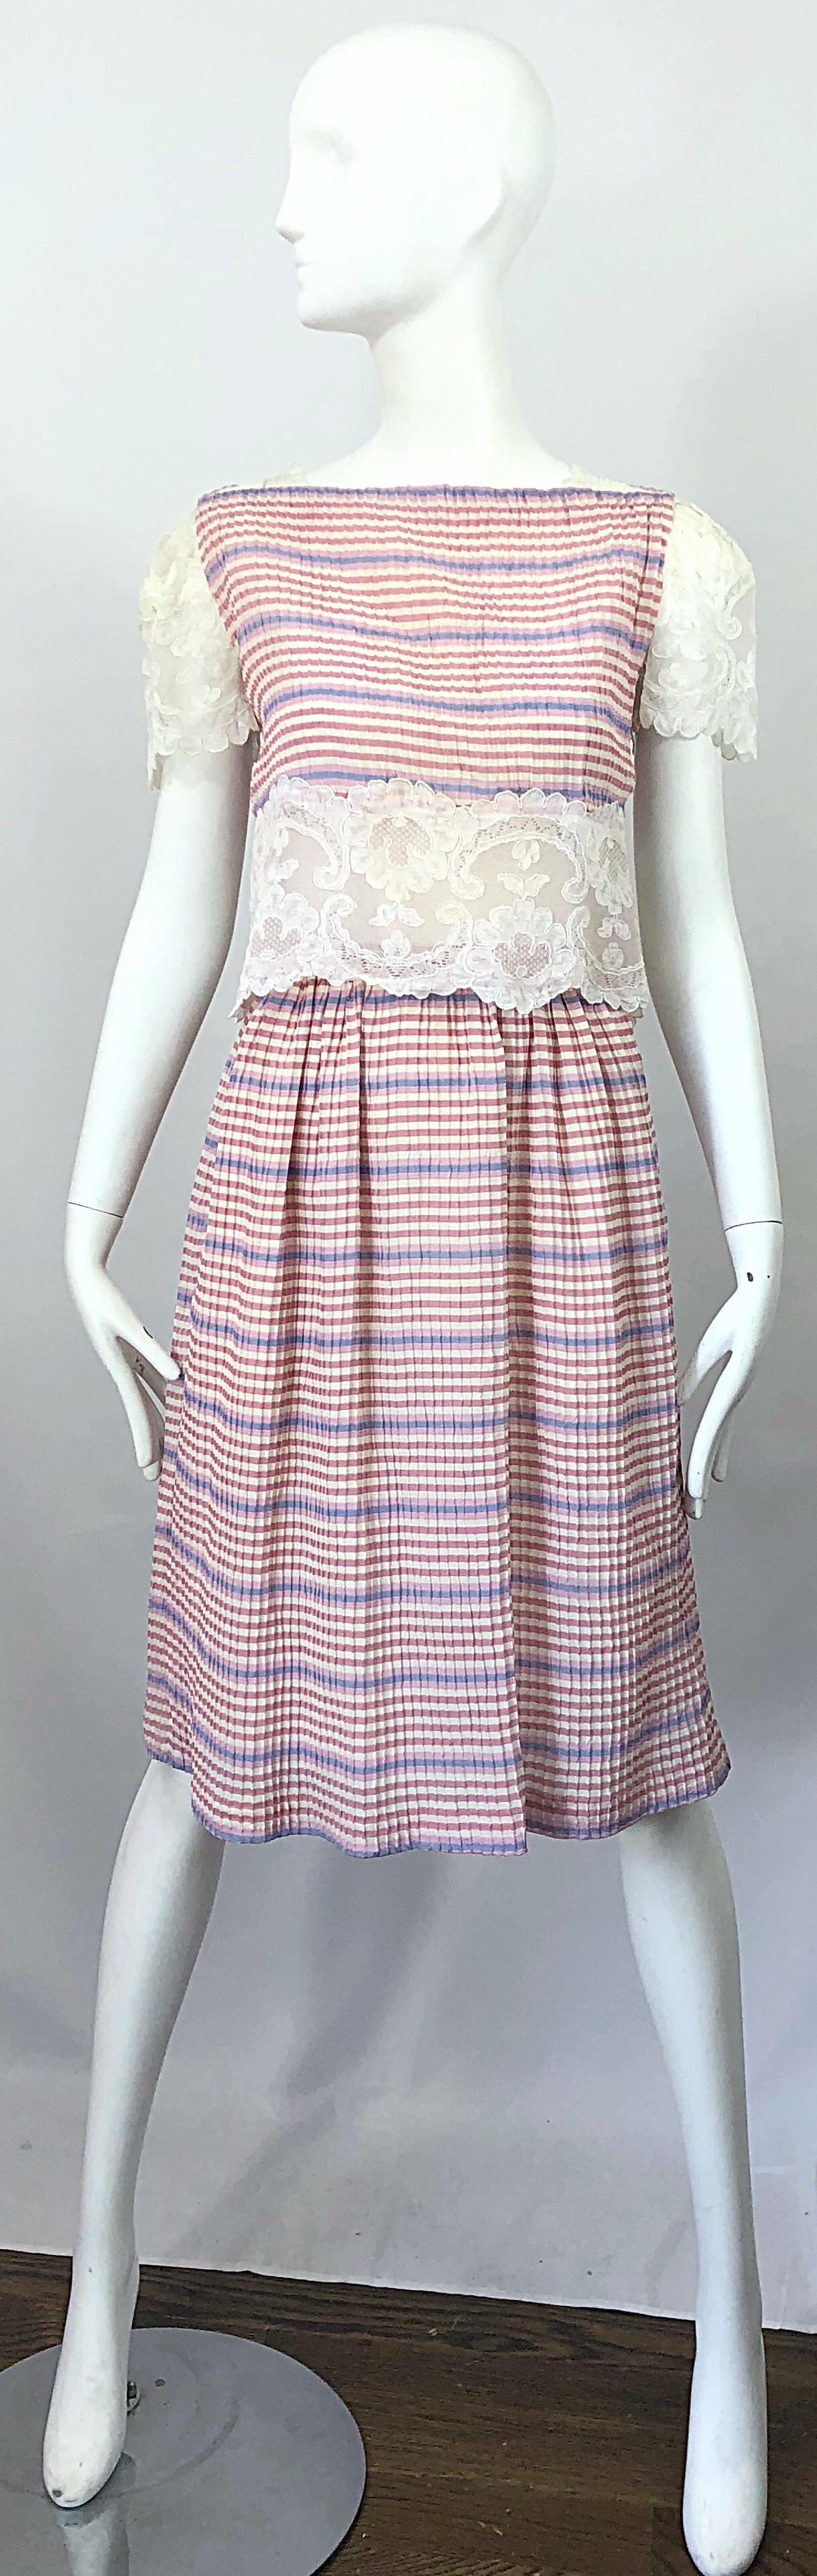 Pretty vintage BOB MACKIE (late 70s) stripes silk and lace crop top and skirt ensemble! Features pleated silk with stripes printed in purple, pink and ivory. White lace cut-out at waist is lined in nude chiffon. Lace cut-outs at each shoulder as